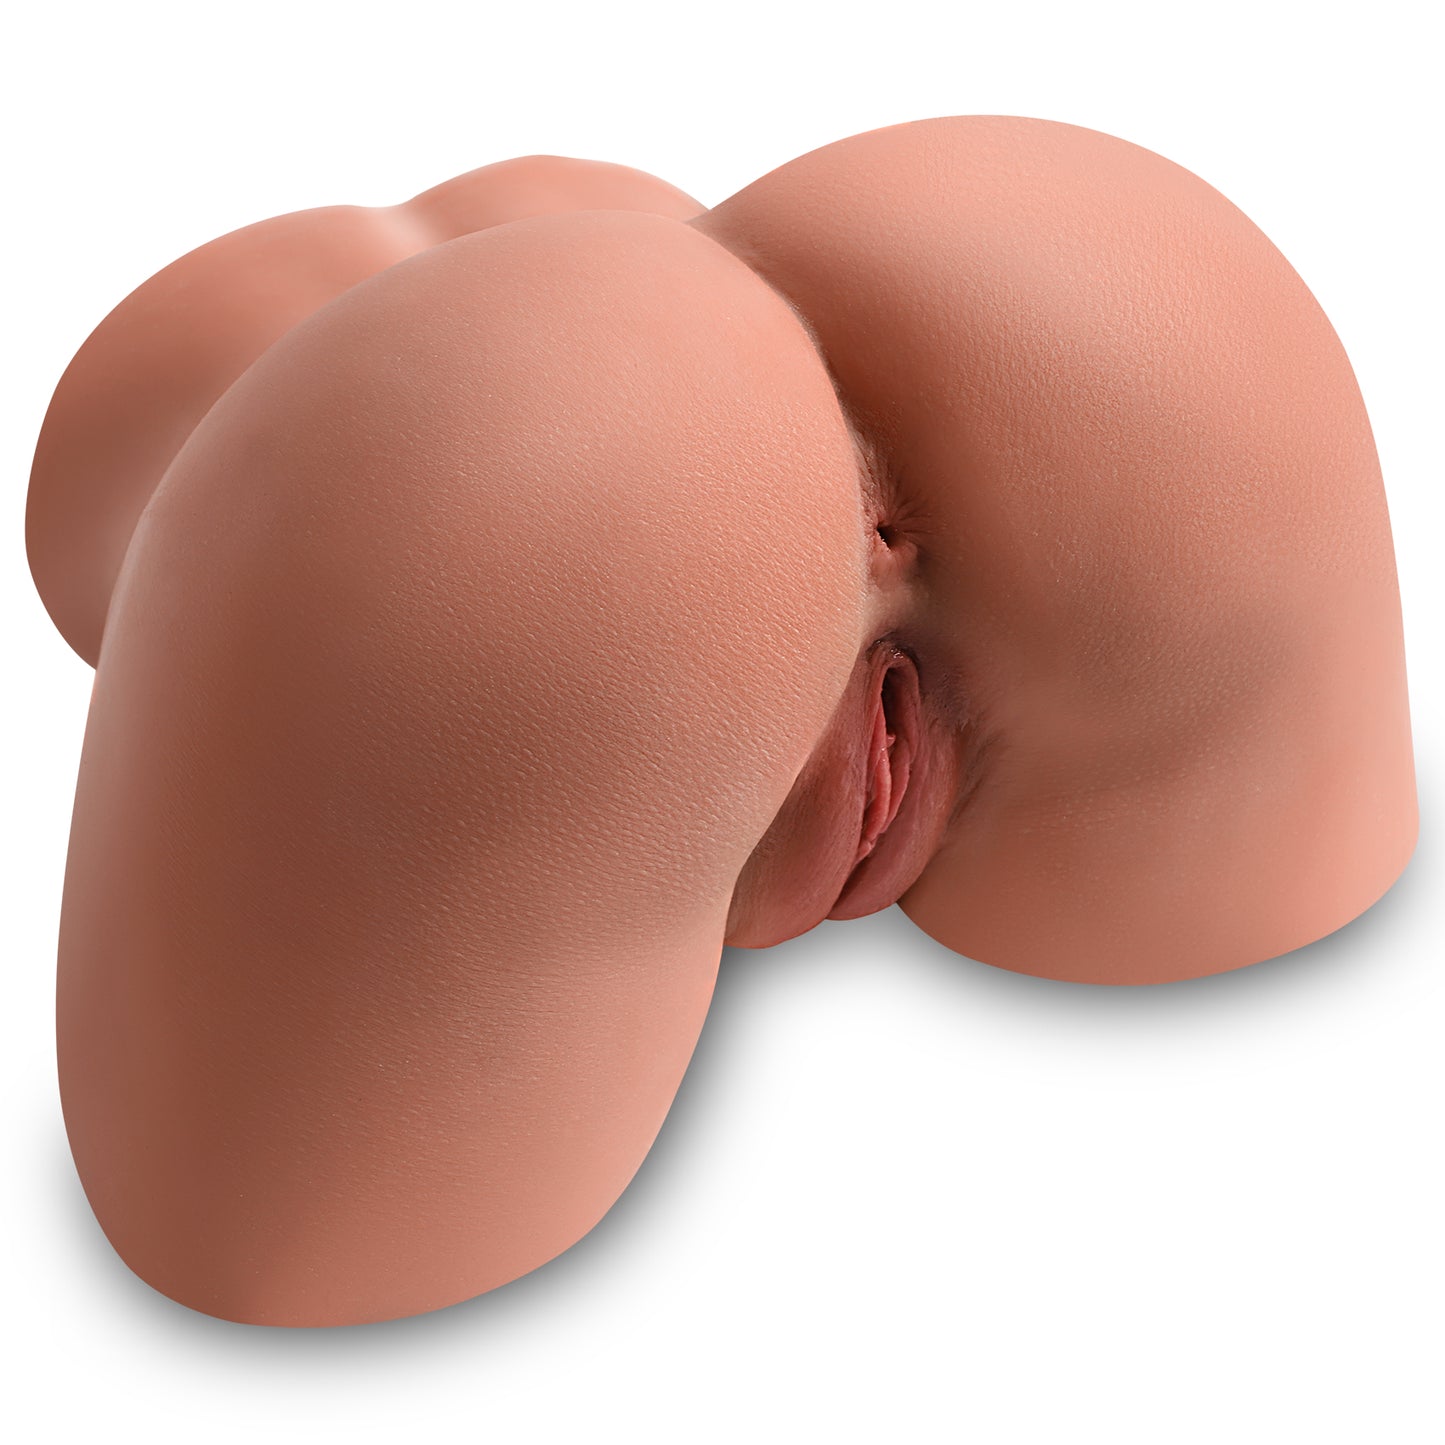 Lifelike Sex Doll Torso Male Masturbator Stroker Realistic Pussy Ass with Vagina Anal Sex, Sex Dolls Adult Toys Male Sex Toys for Men Pleasure, 14LB